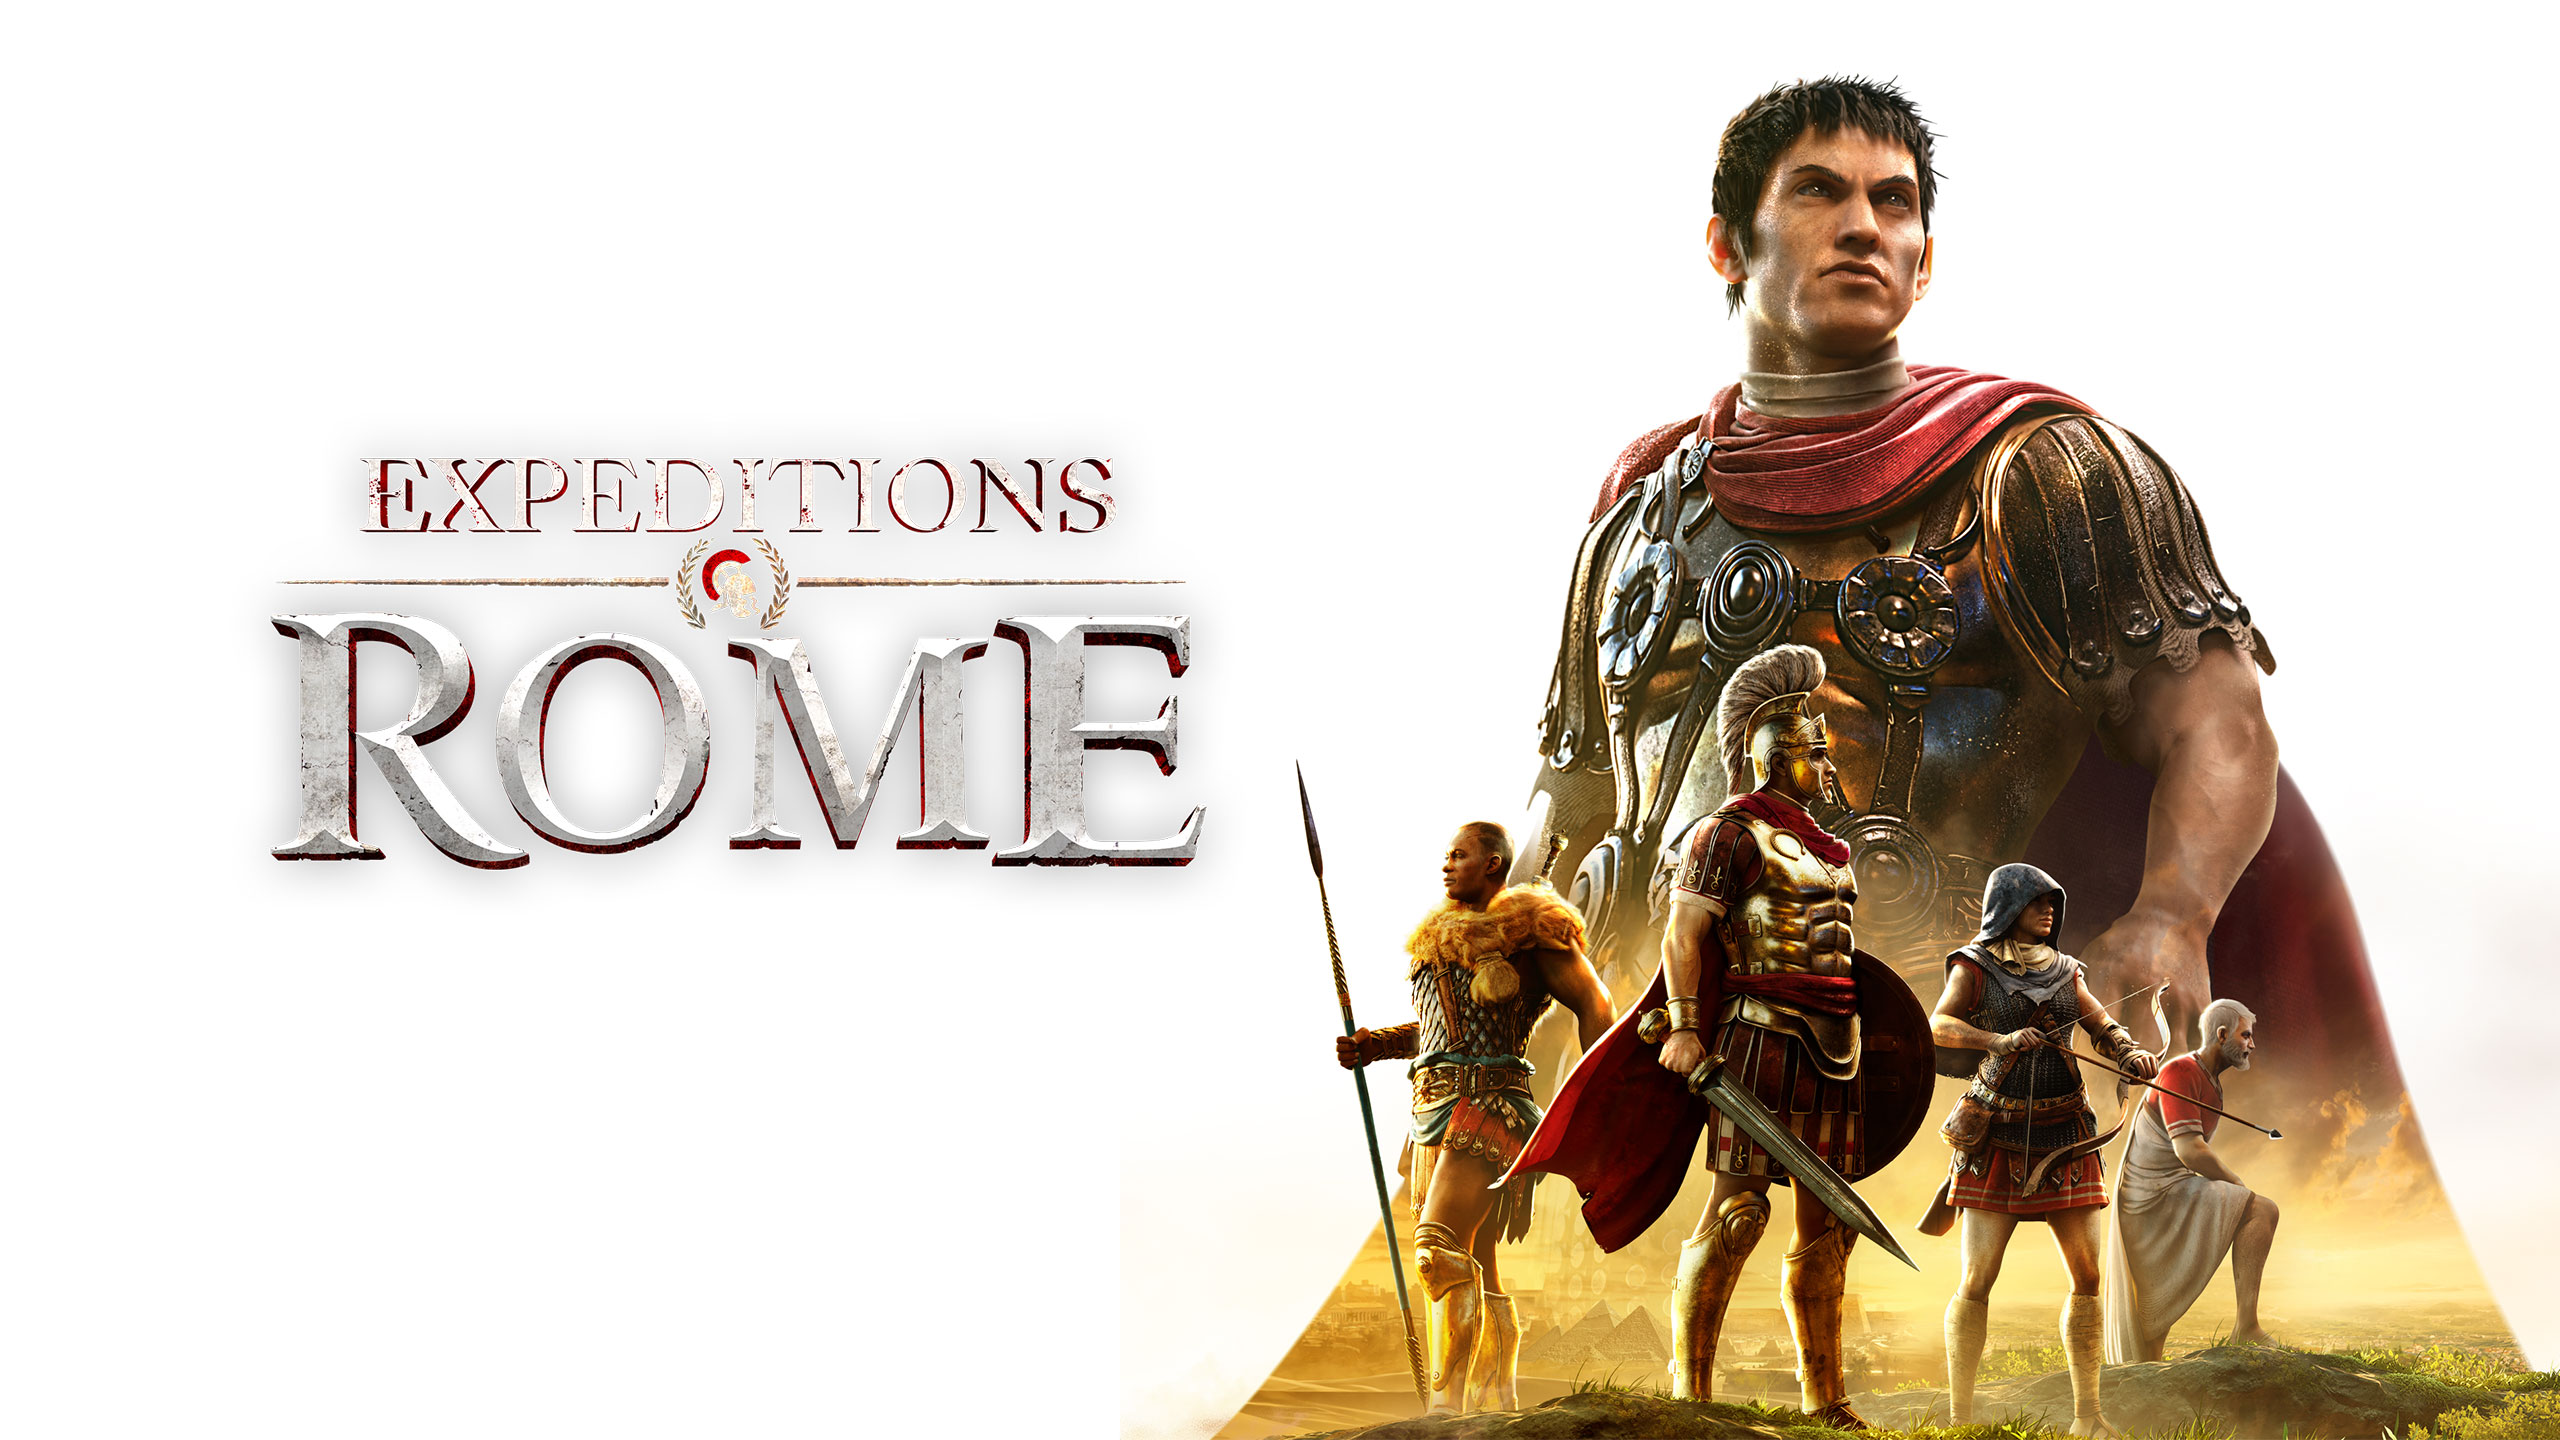 Expeditions__Rome___Трейлер_10032024182731_MPEG-4 (720p)